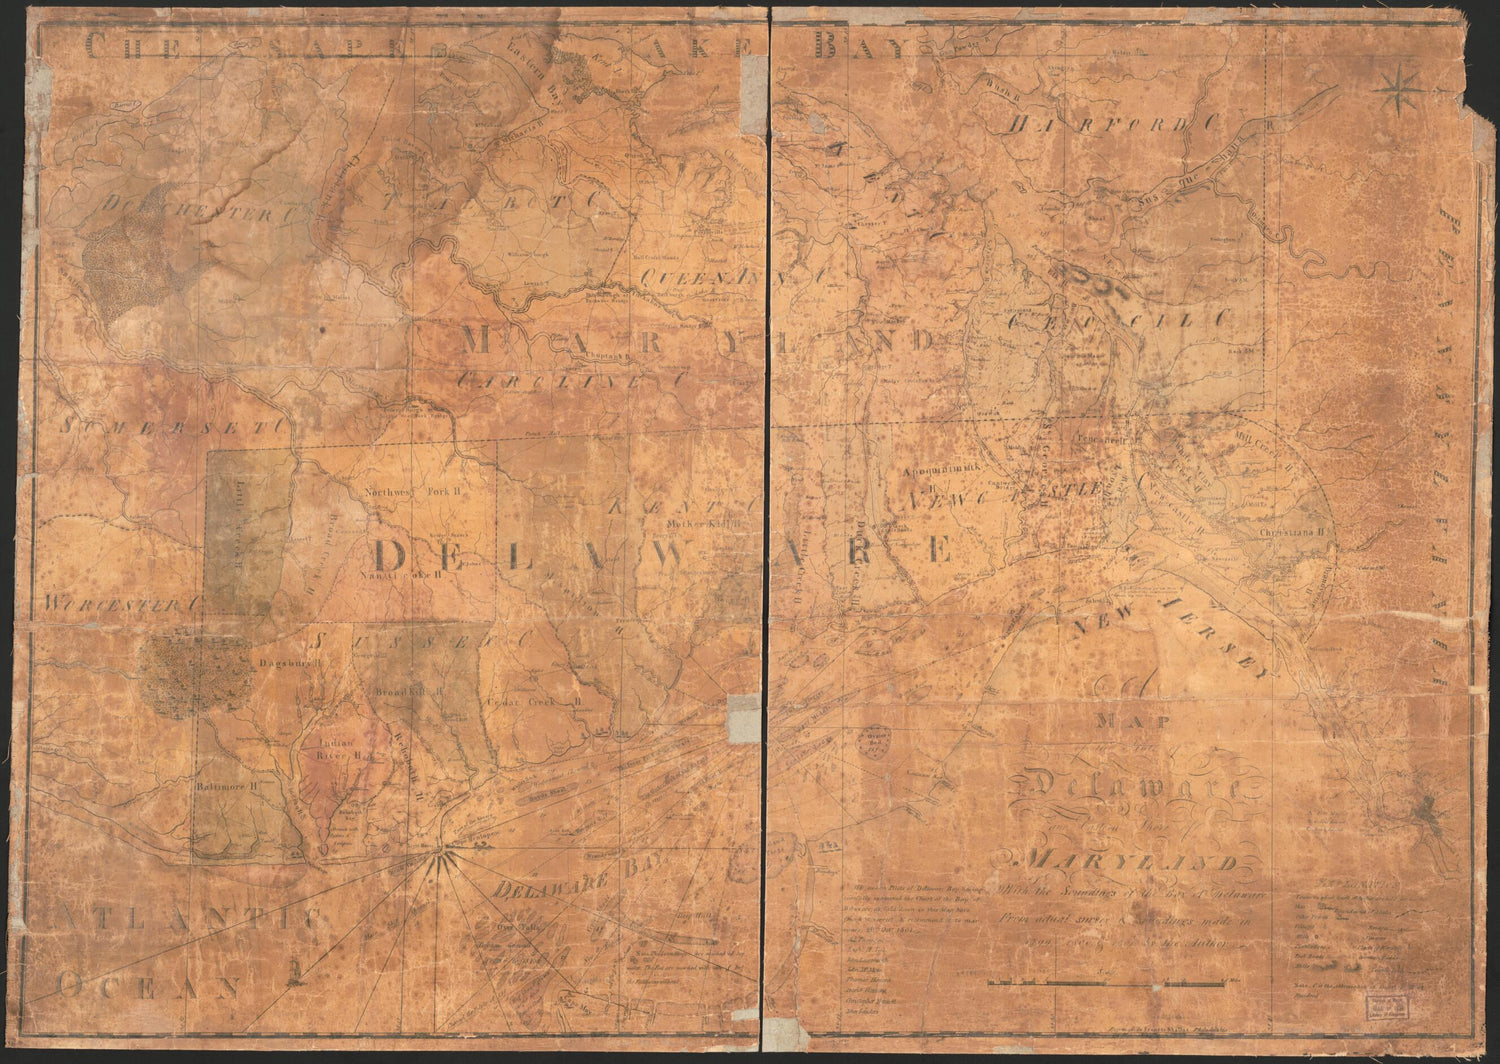 This old map of A Map of the State of Delaware and the Eastern Shore of Maryland : With the Soundings of the Bay of Delaware from 1801 was created by Francis Shallus, Charles Varle in 1801